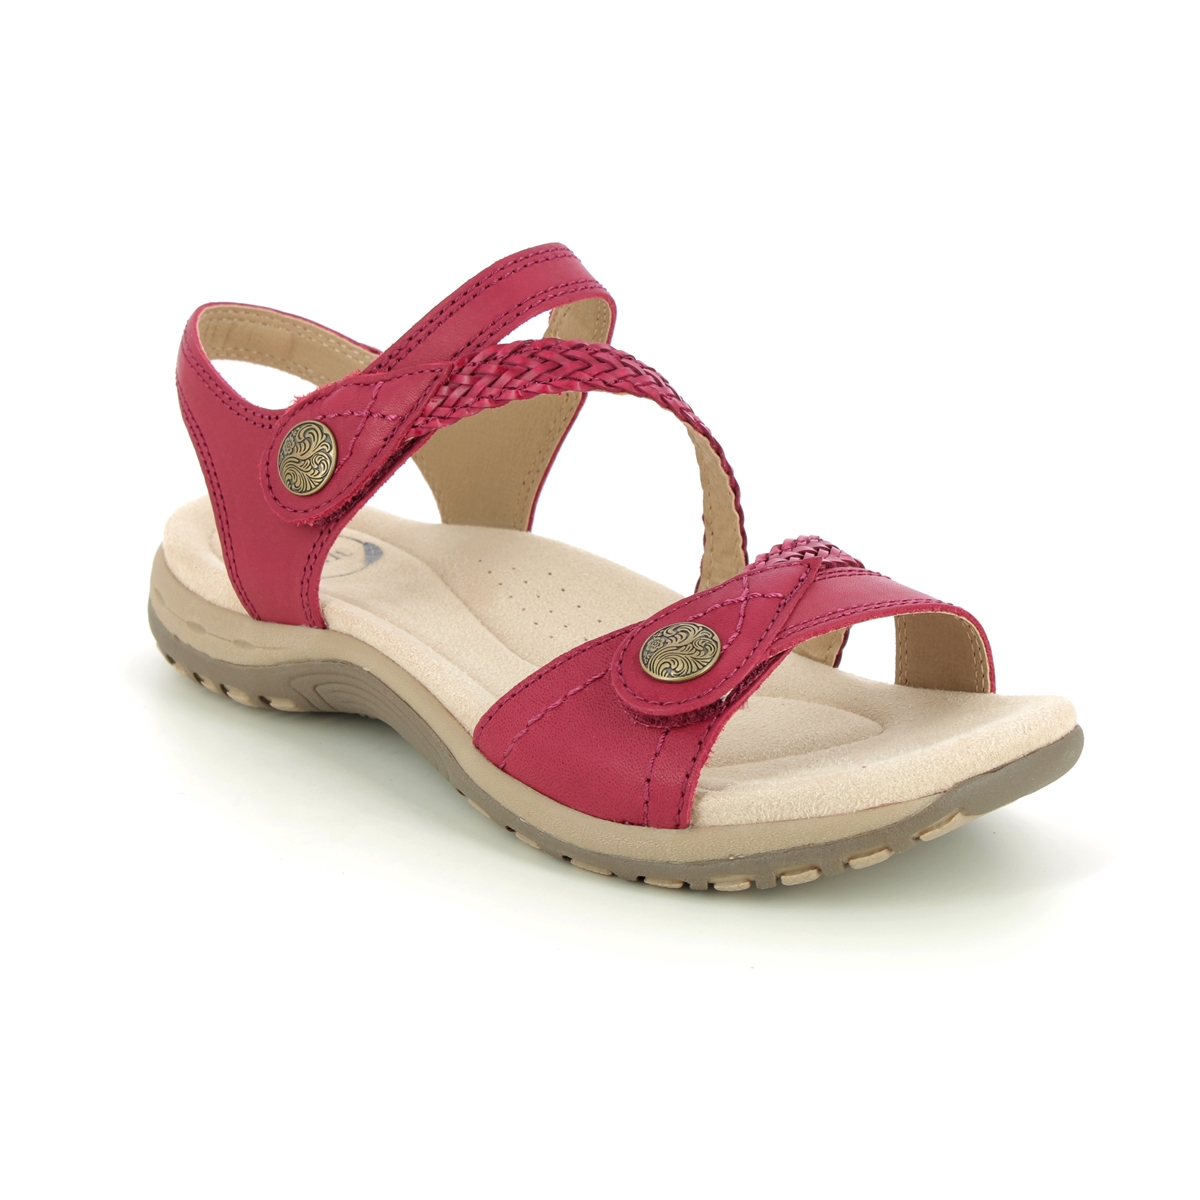 Earth Spirit Malibu Red leather Womens Comfortable Sandals 40571- in a Plain Leather in Size 8